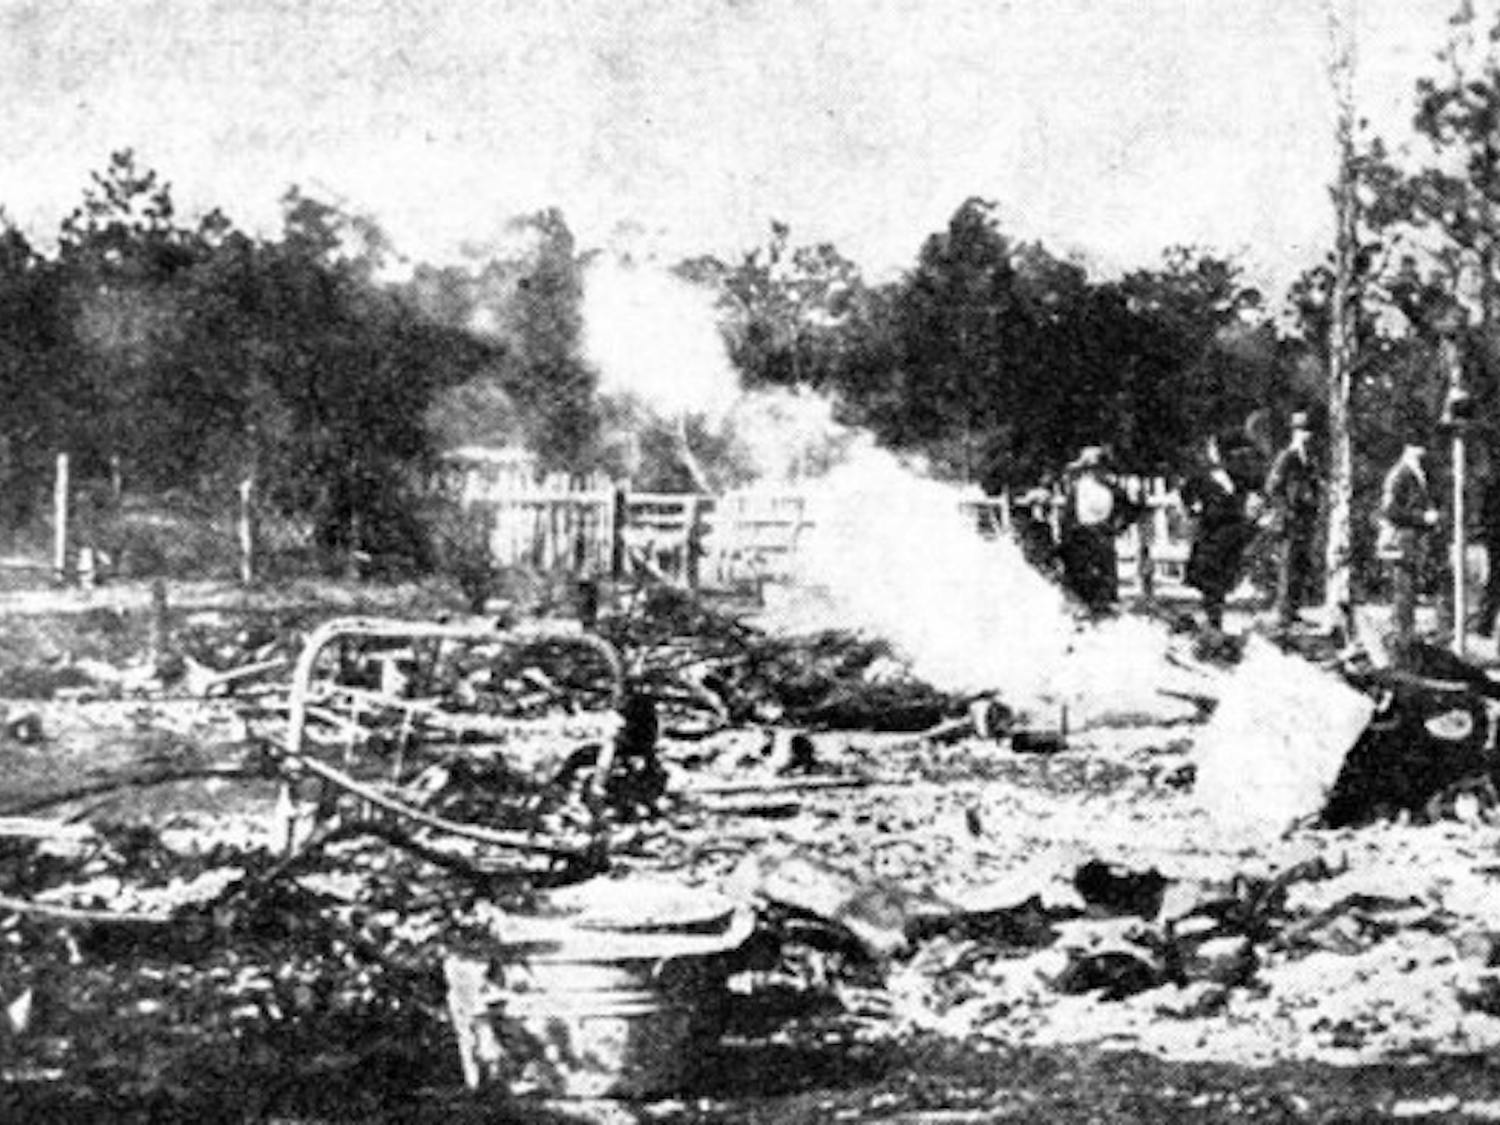 The ruins of a home destroyed during the Rosewood attack, avenging the alleged murder of Fannie Taylor.